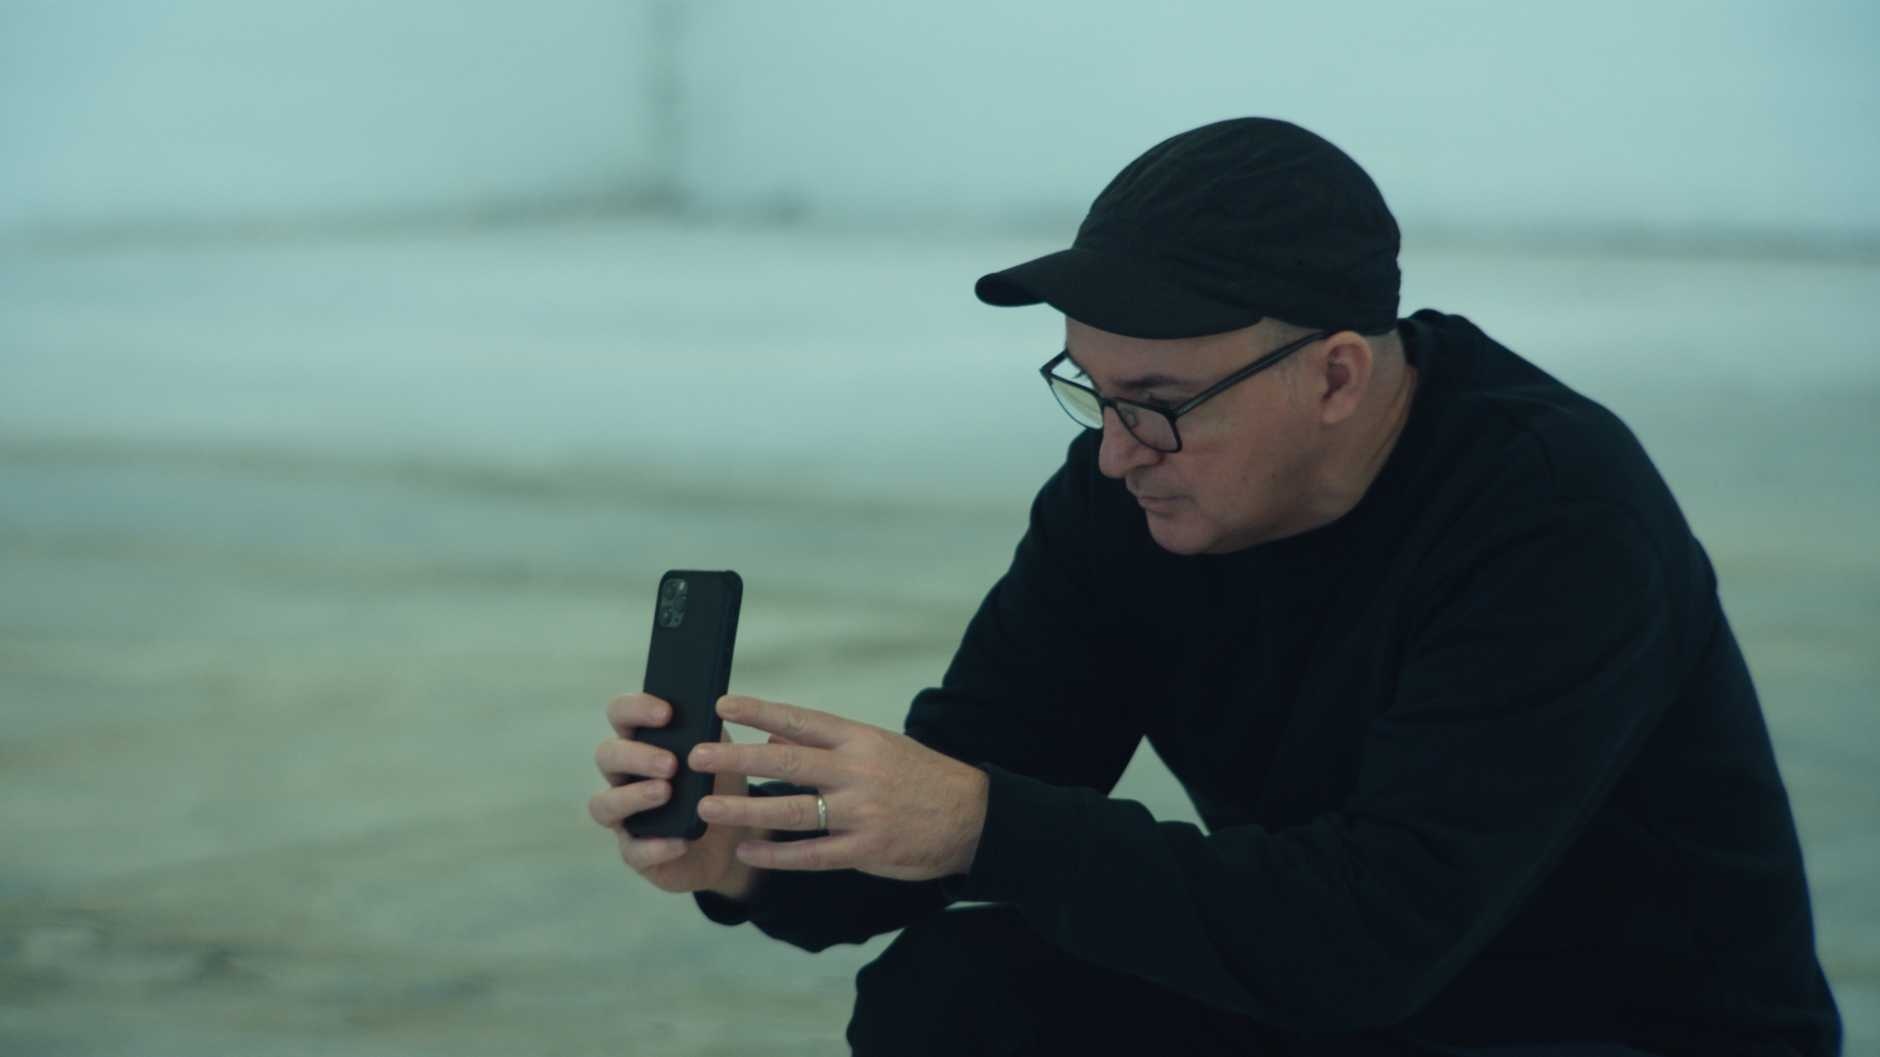 A white man in a dark gray baseball cap and glasses kneels to steady an iPhone that he concentrates on as if taking a photo with it.